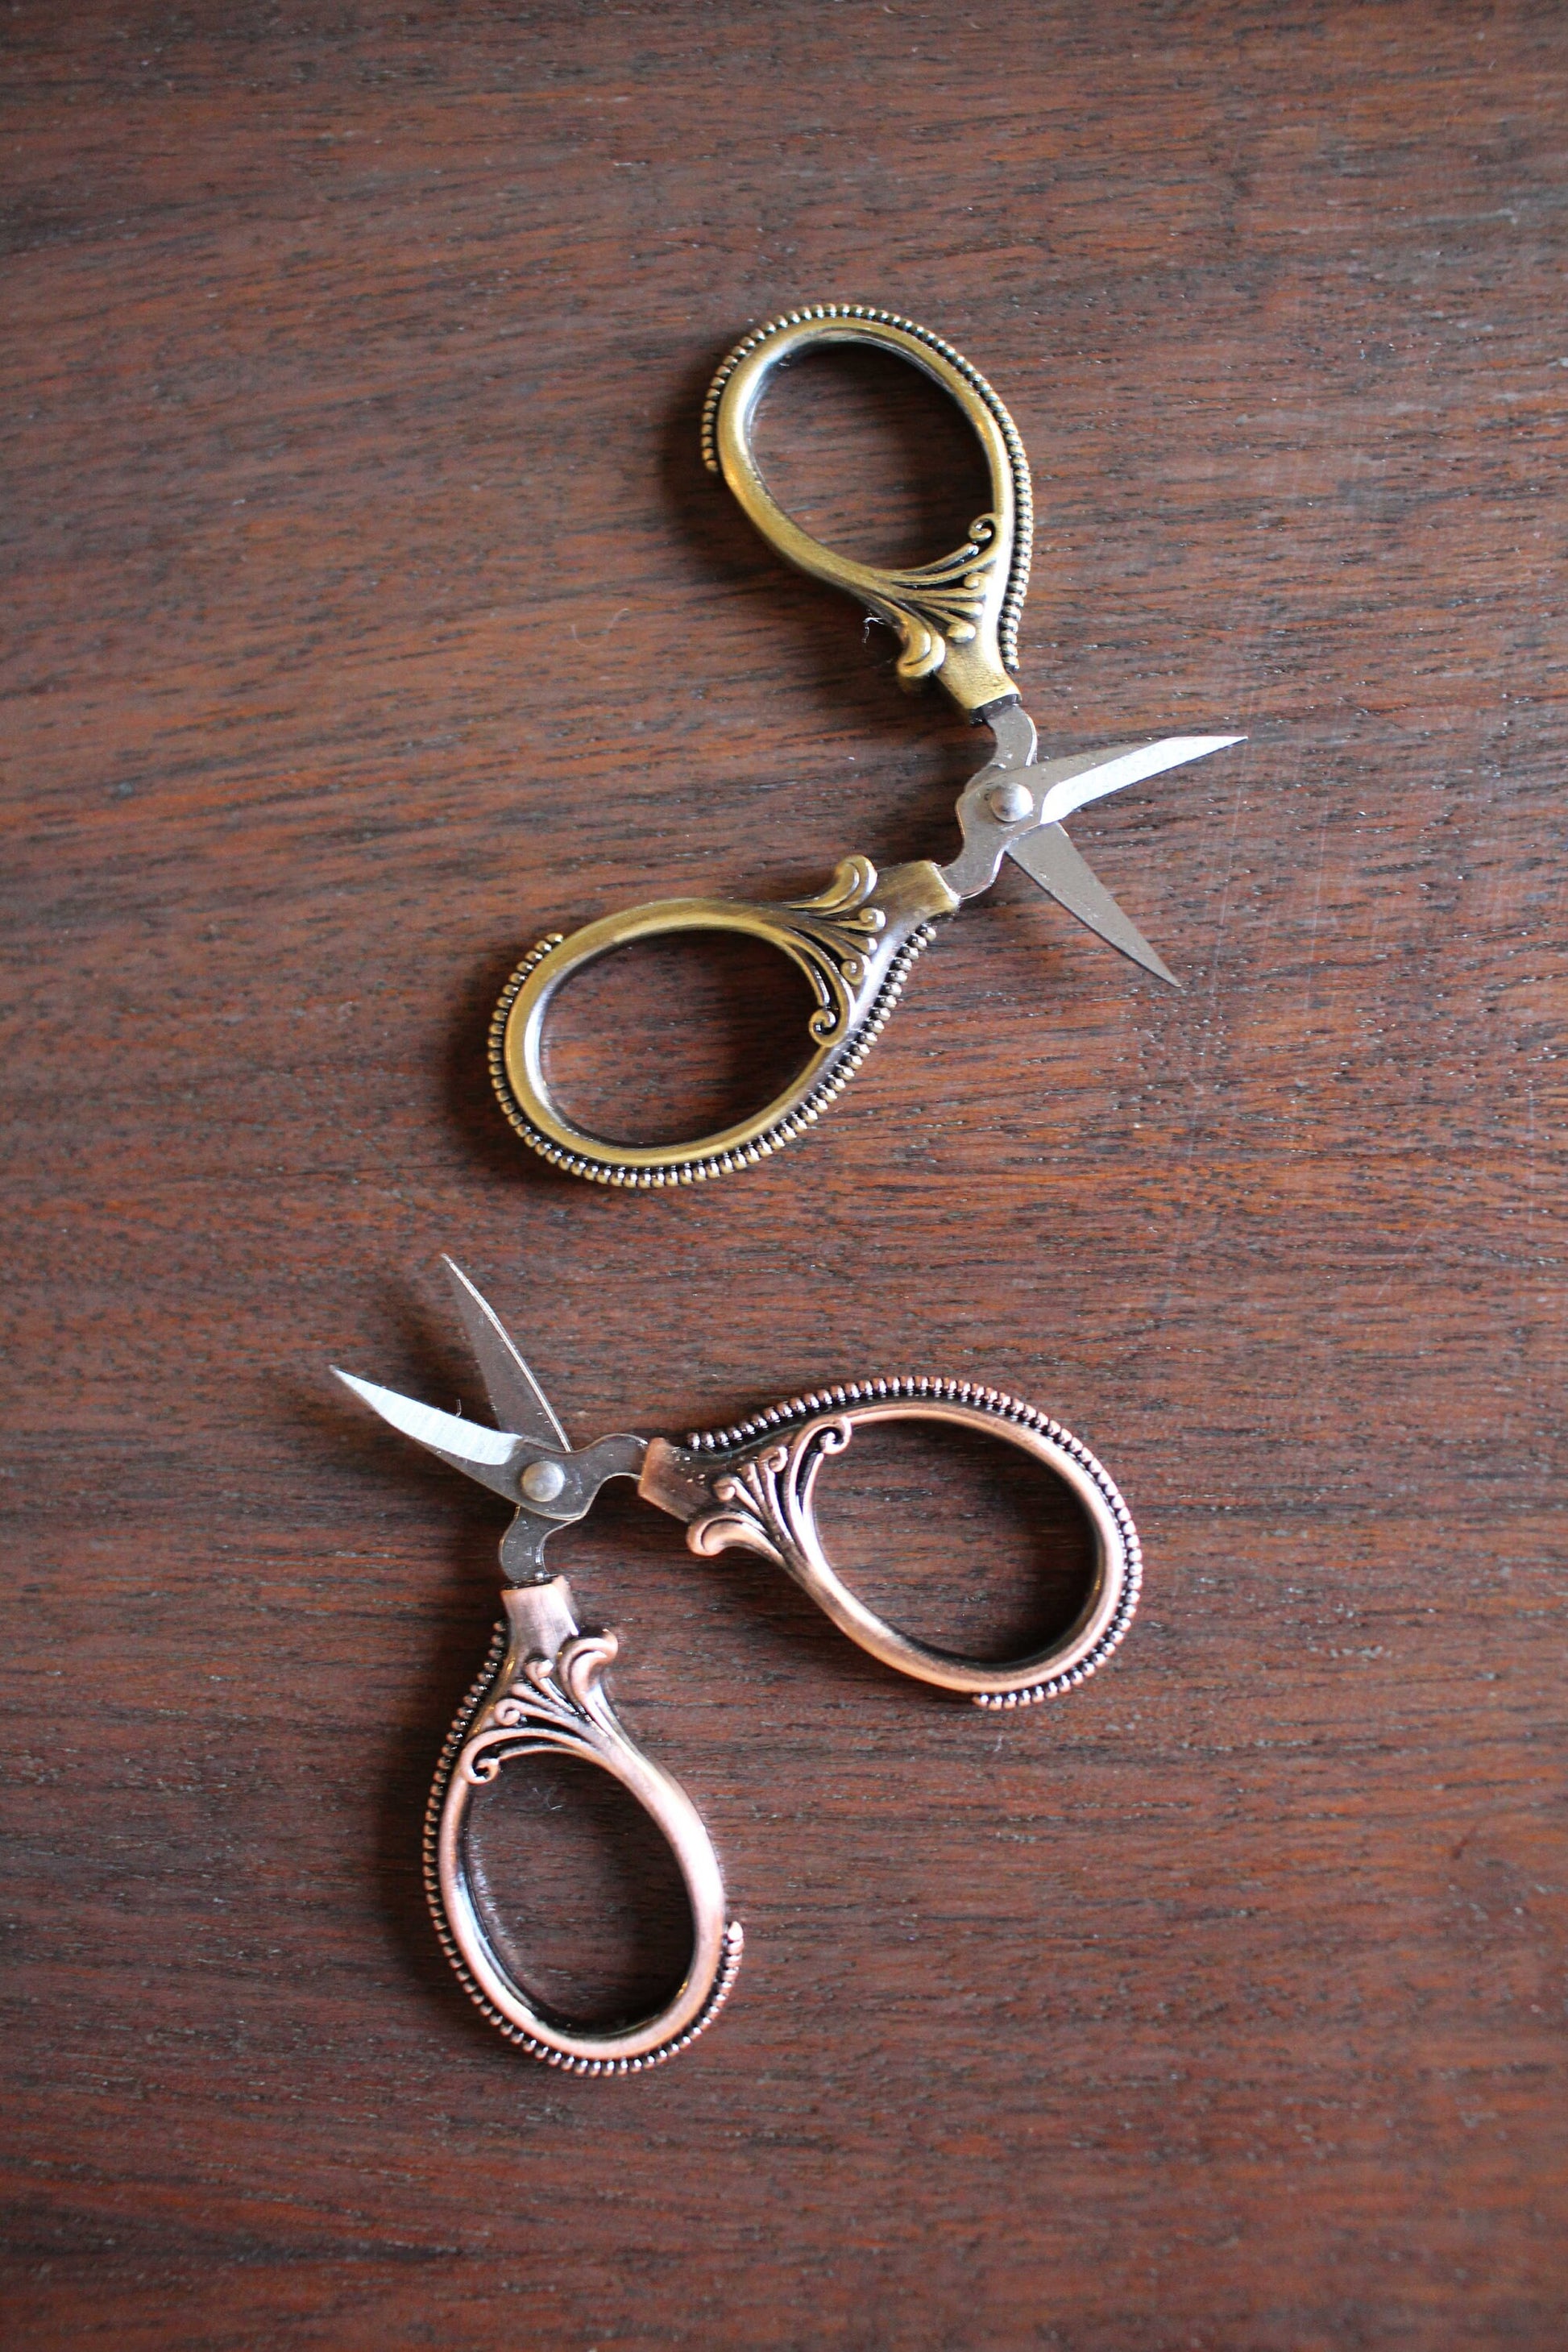 Mini Embroidery Scissors • Vintage Style Ornate Design in Antique Gold or Copper • Unique Gift for Embroiderers and Sewists